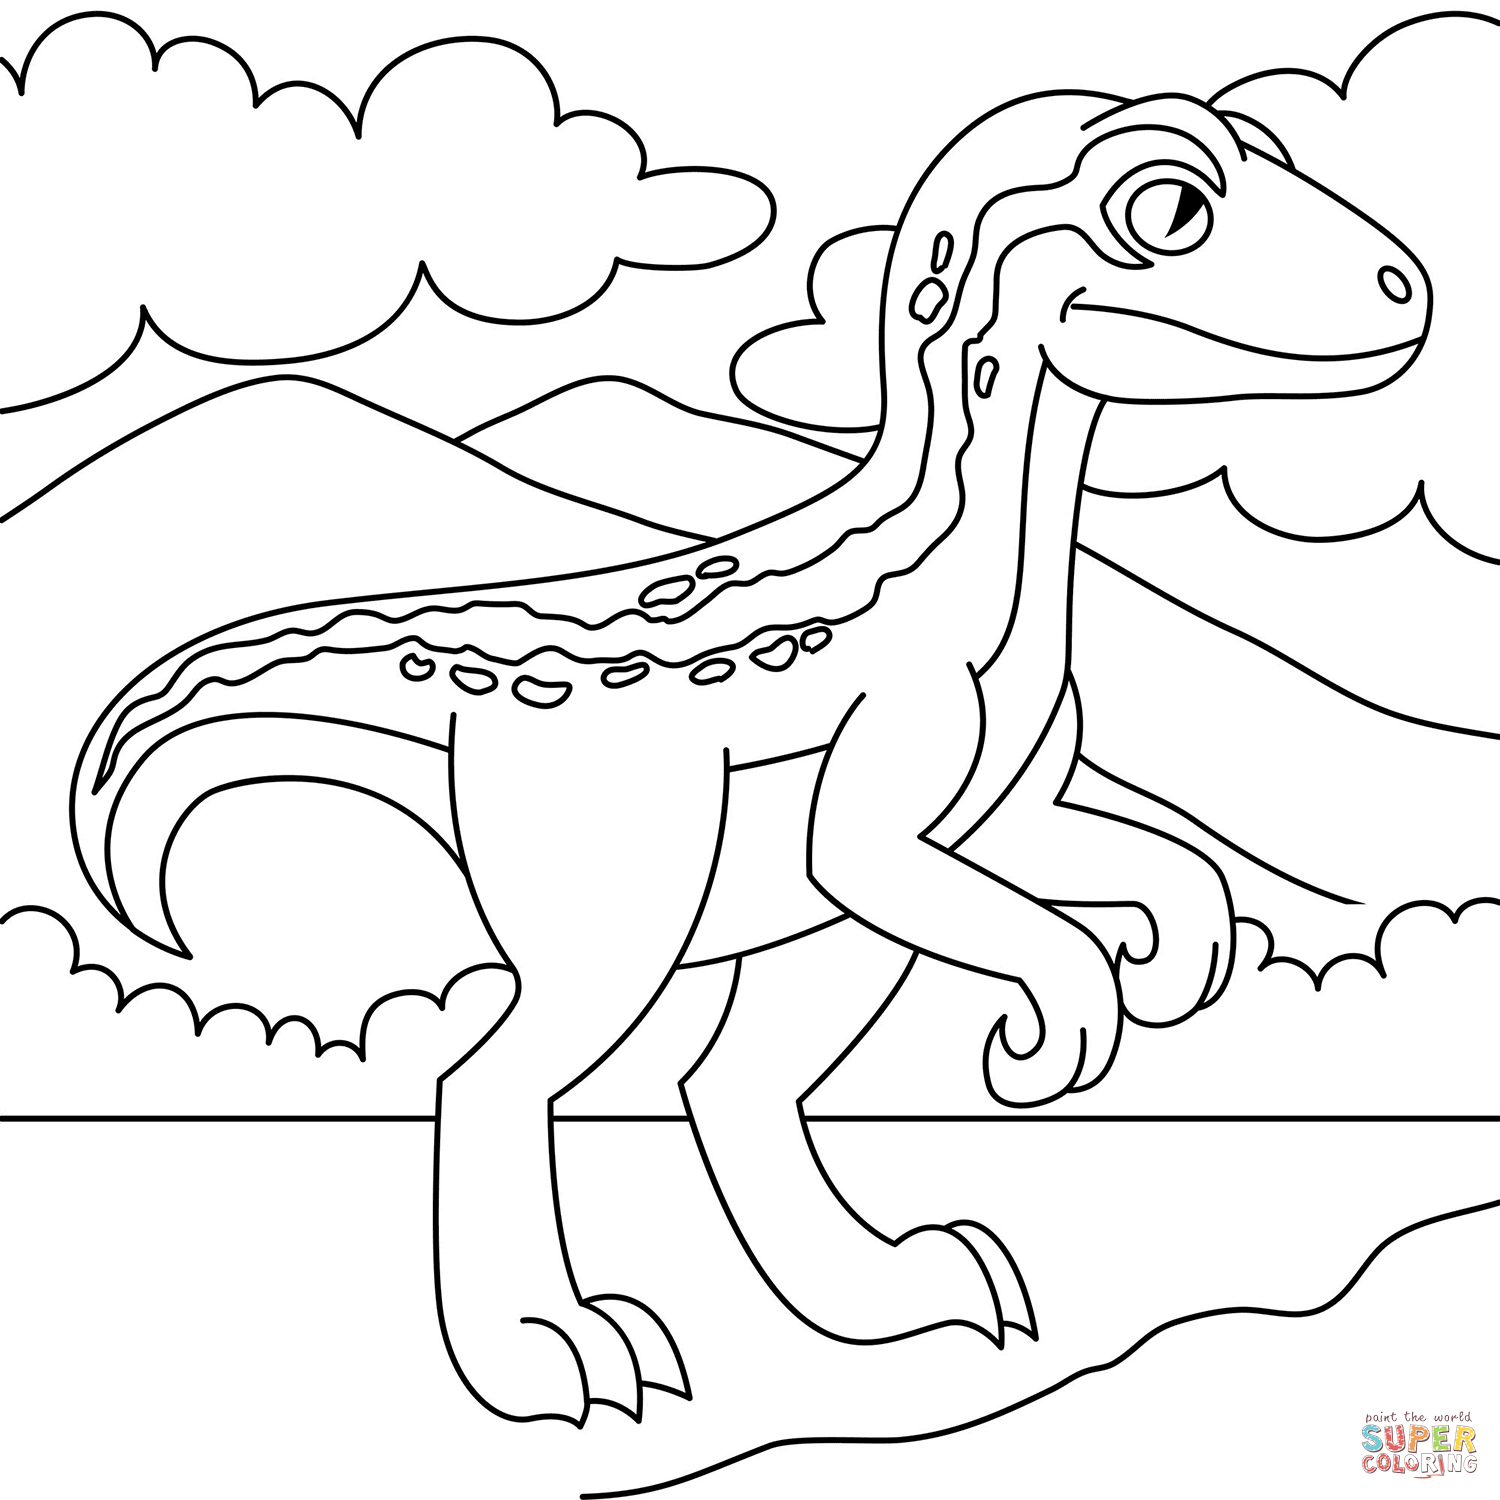 Cartoon velociraptor coloring page free printable coloring pages